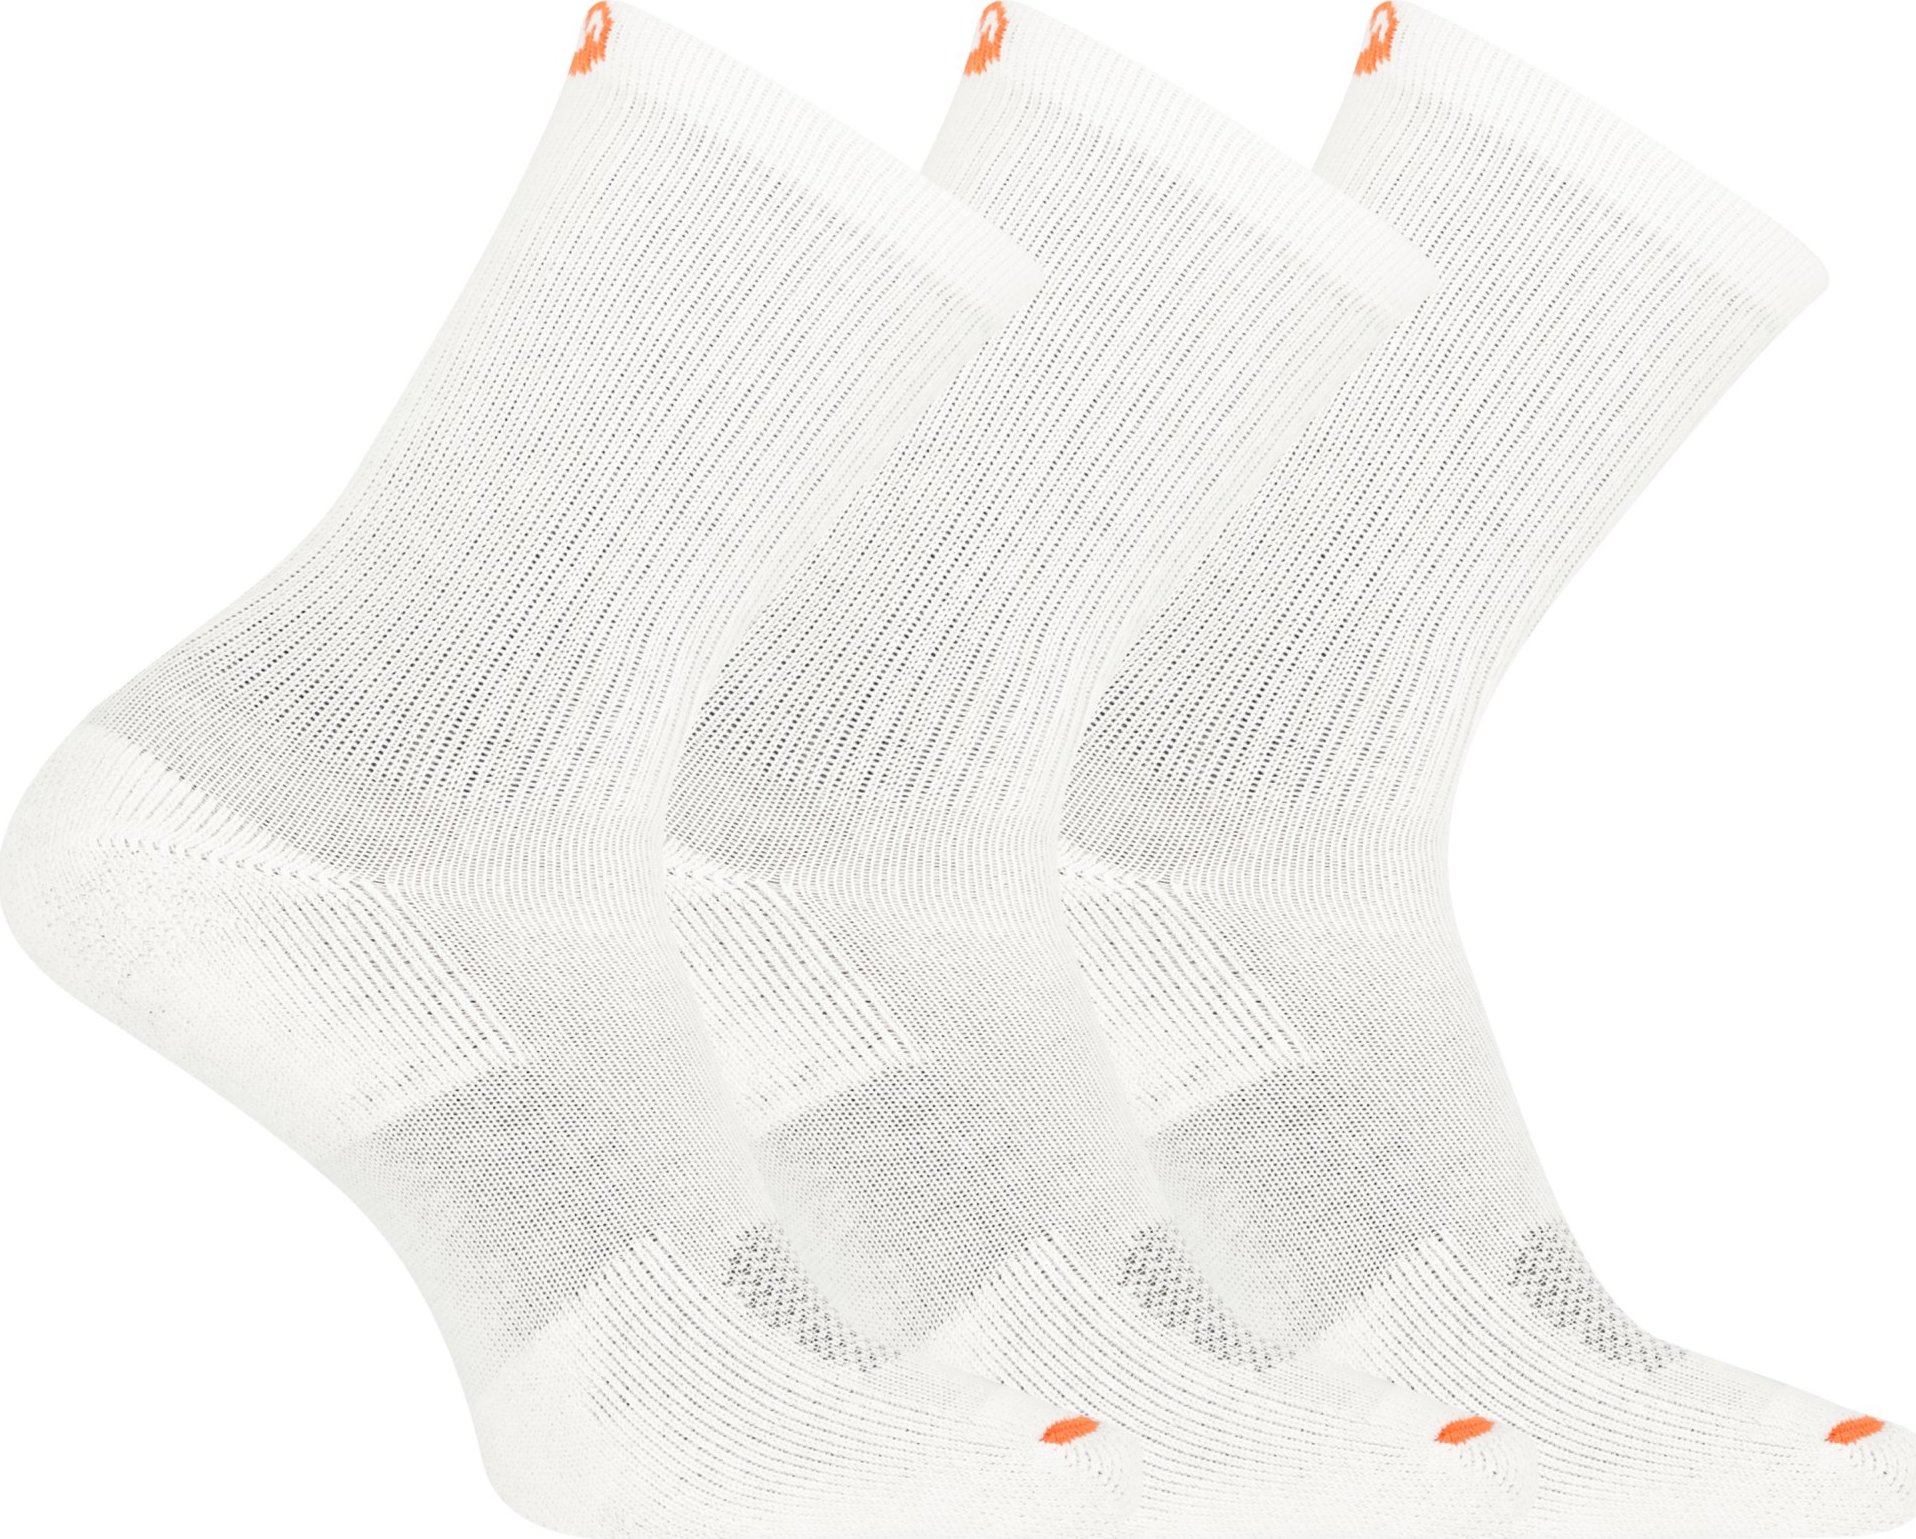 Ponožky MERRELL Cushioned Cotton Crew (3 pack) Velikost: M/L